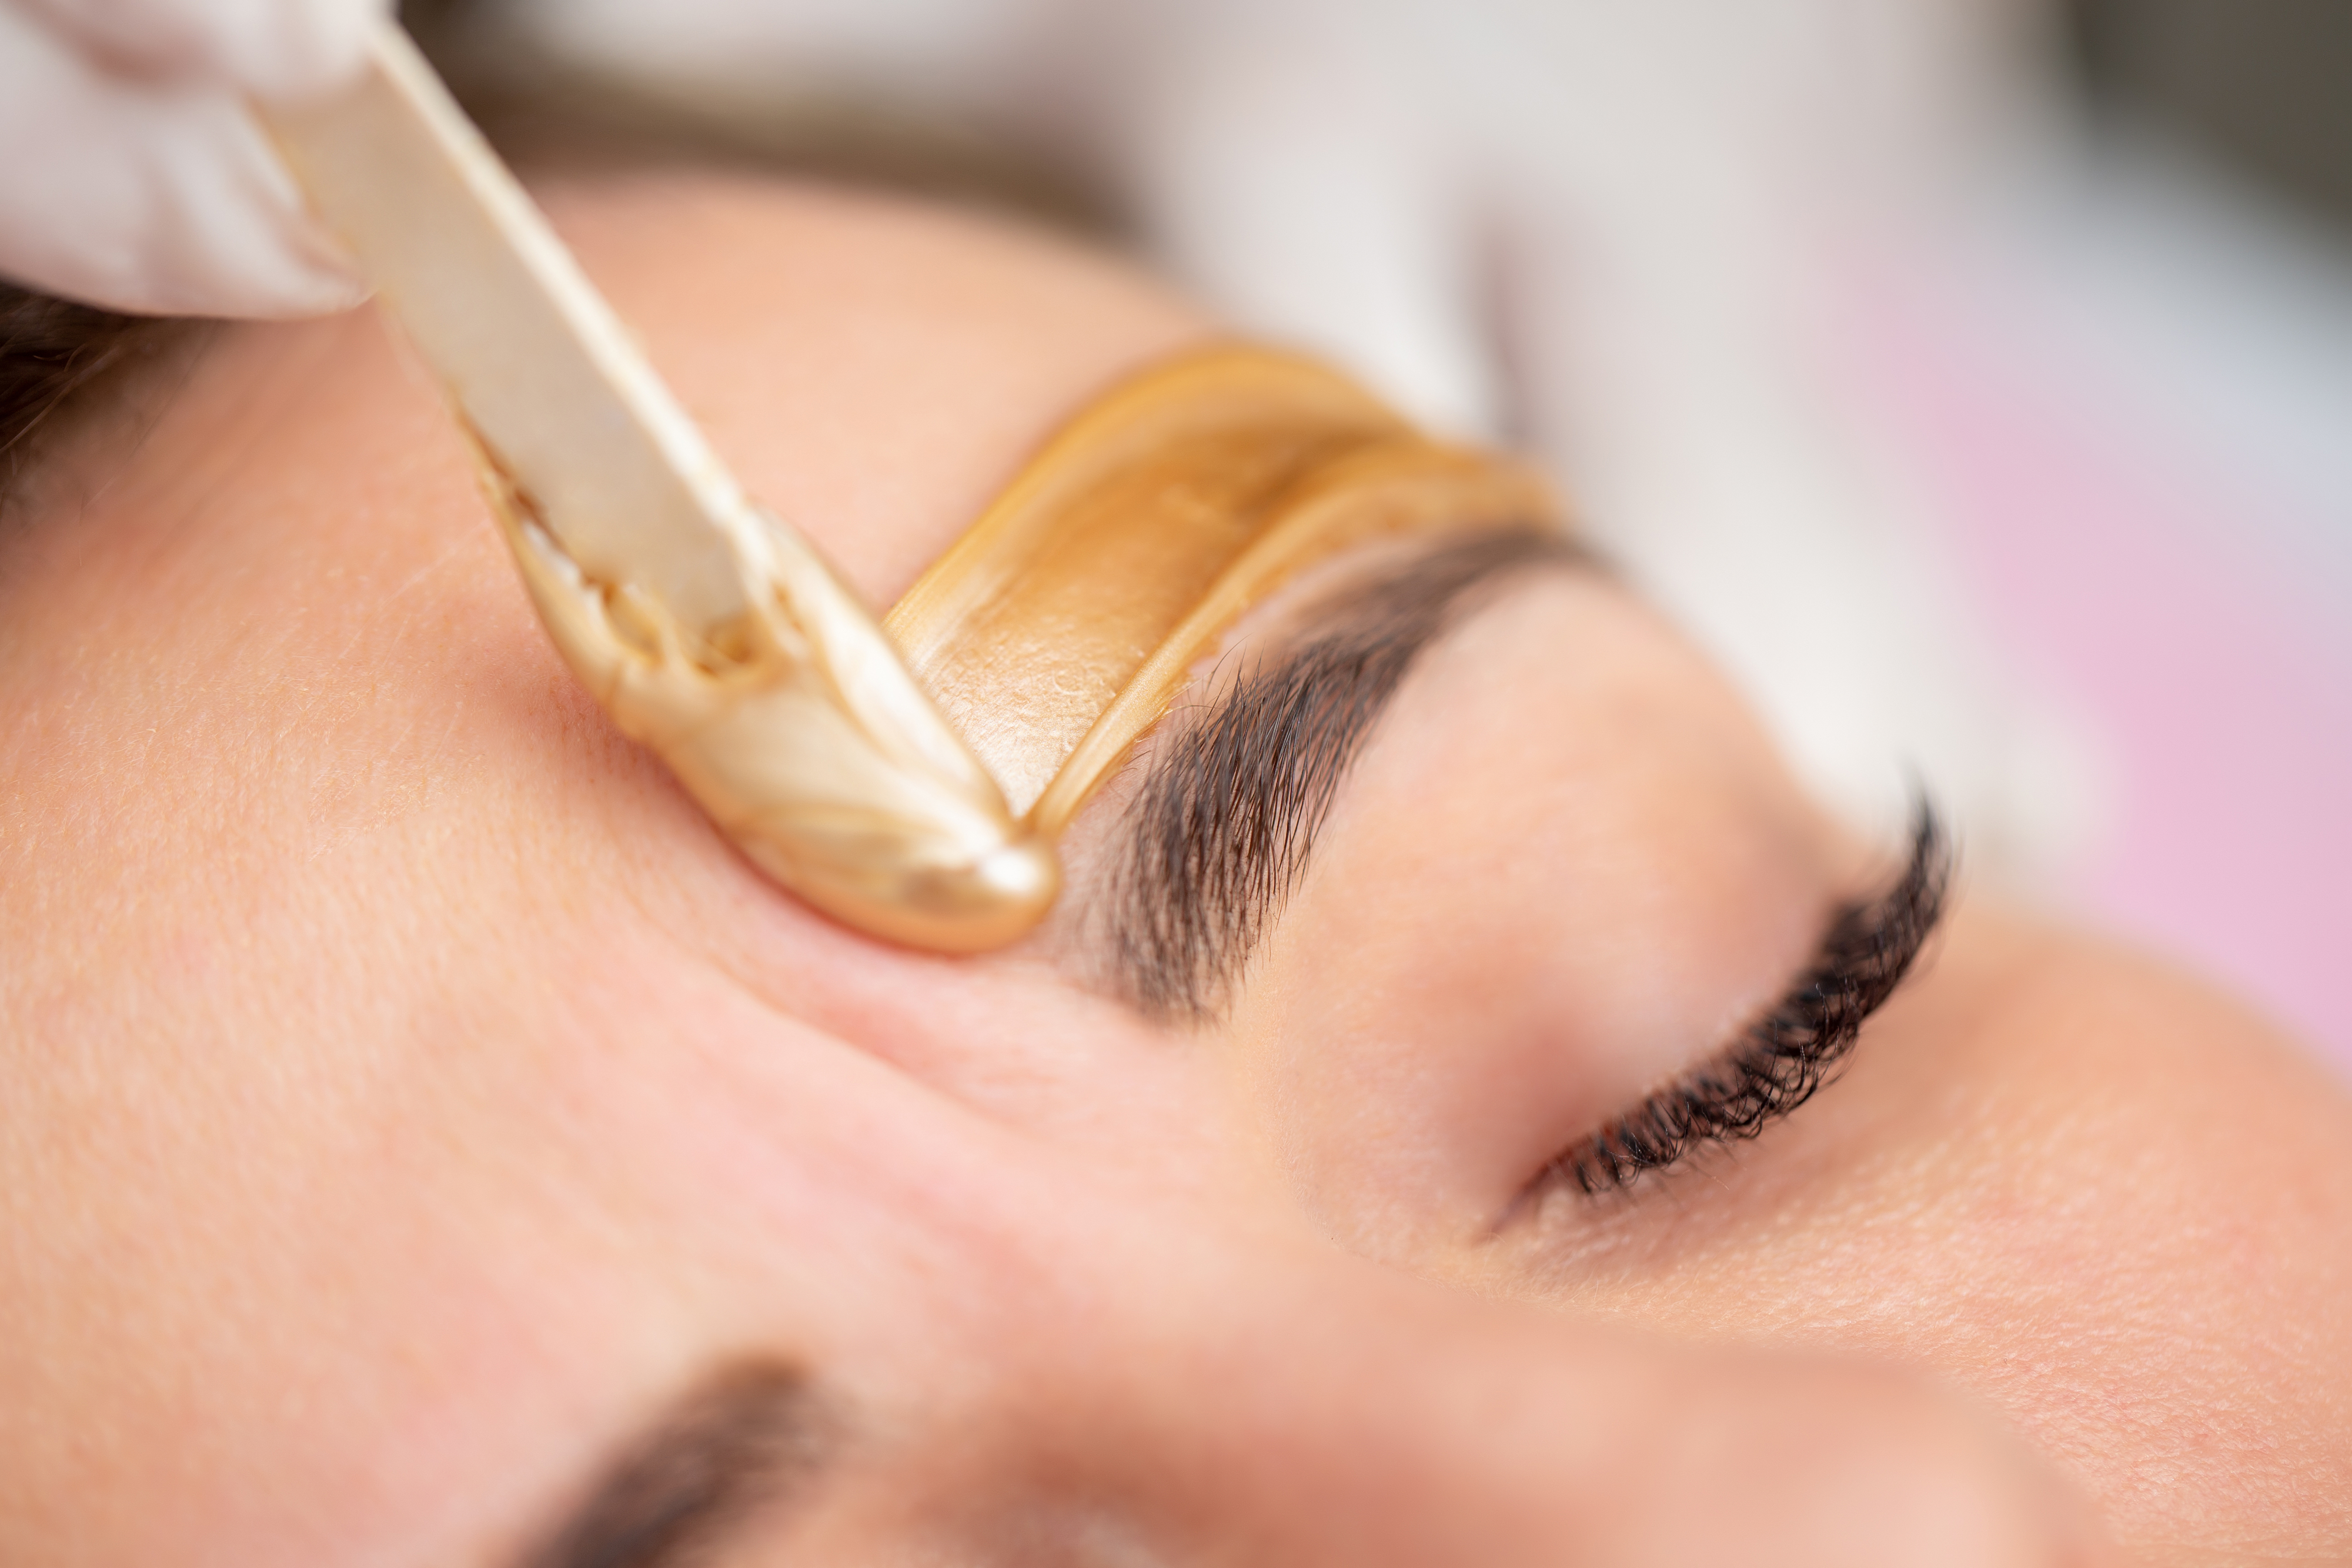 Close-up of a person getting eyebrow wax applied, focusing on one eyebrow